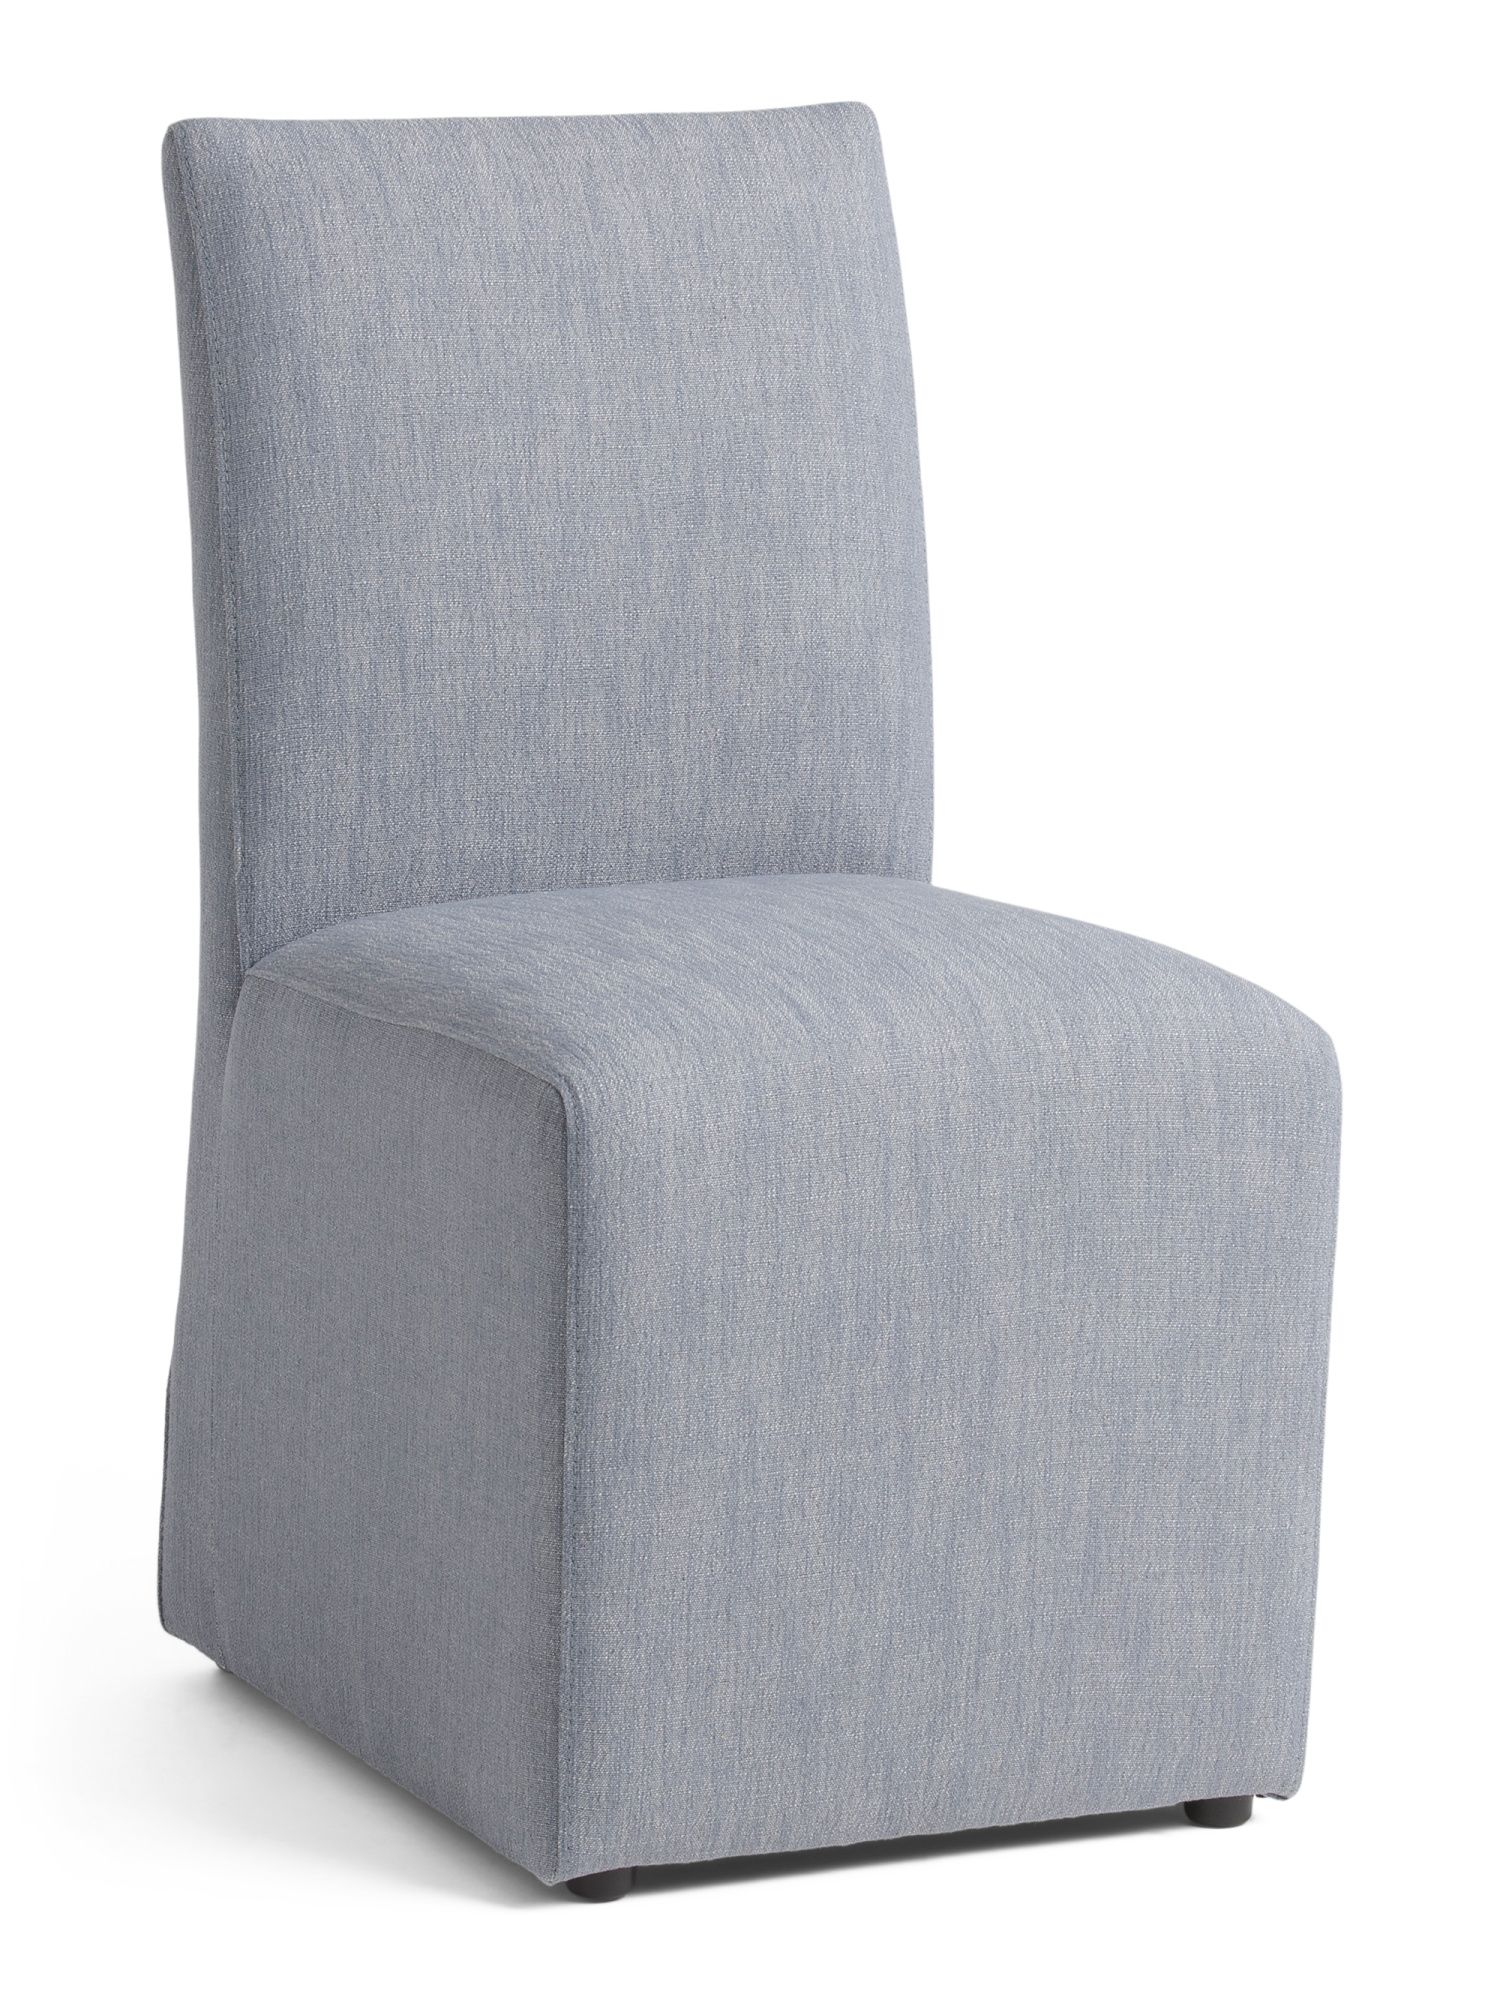 Cambridge Slipcover Dining Chair In Performance Fabric | Marshalls